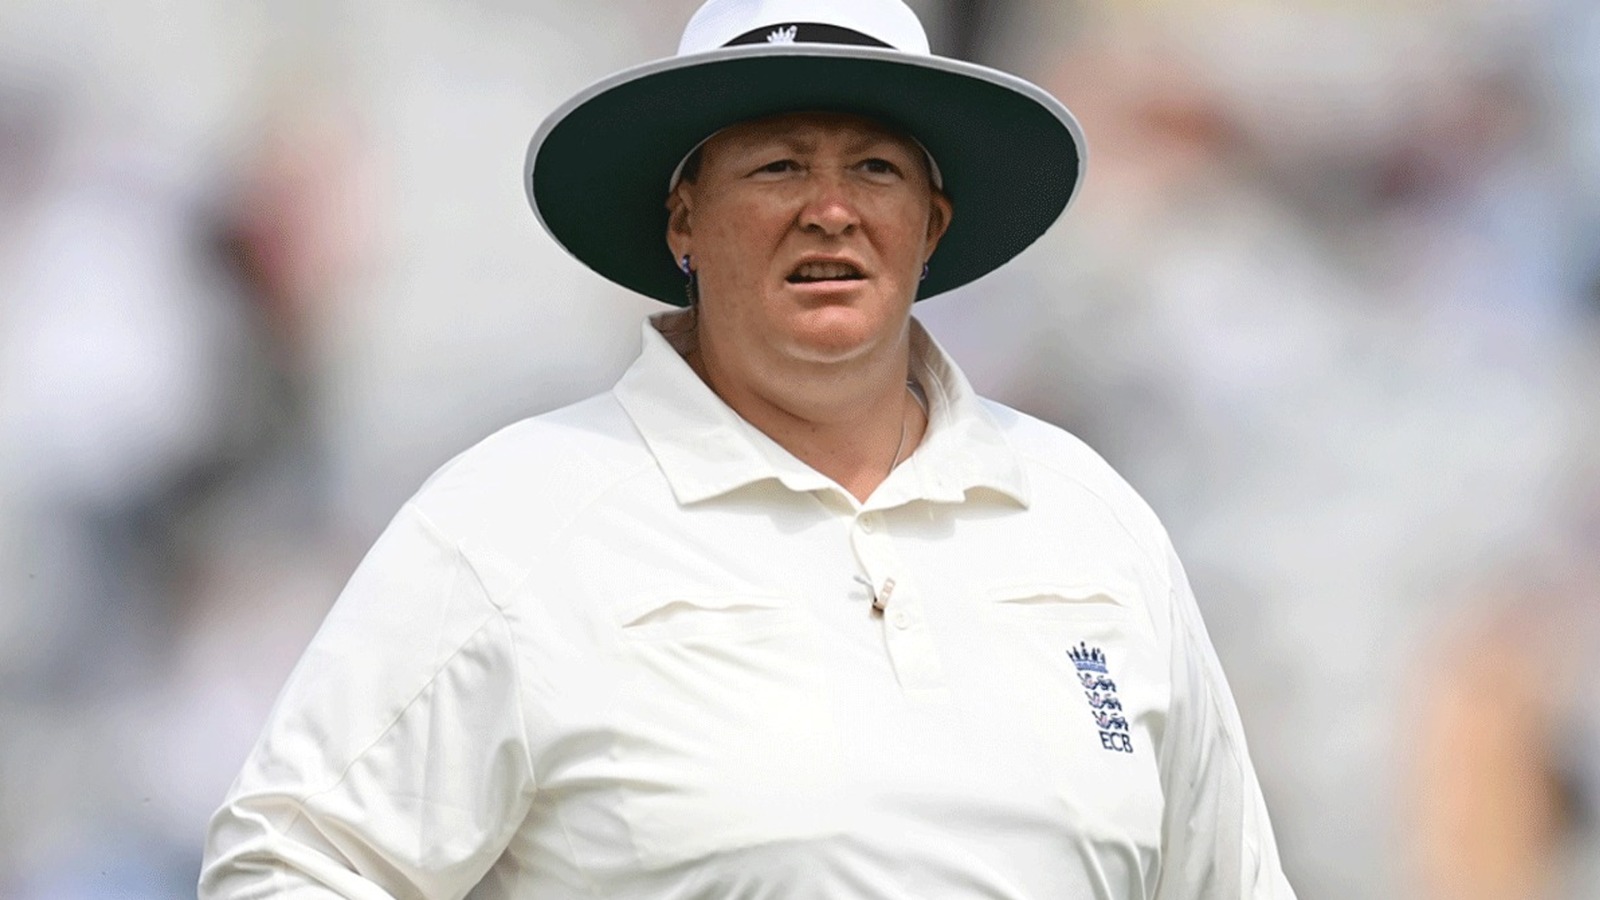 Sue Redfern Set To Become First Woman Umpire In Men’s First-Class Cricket In Britain